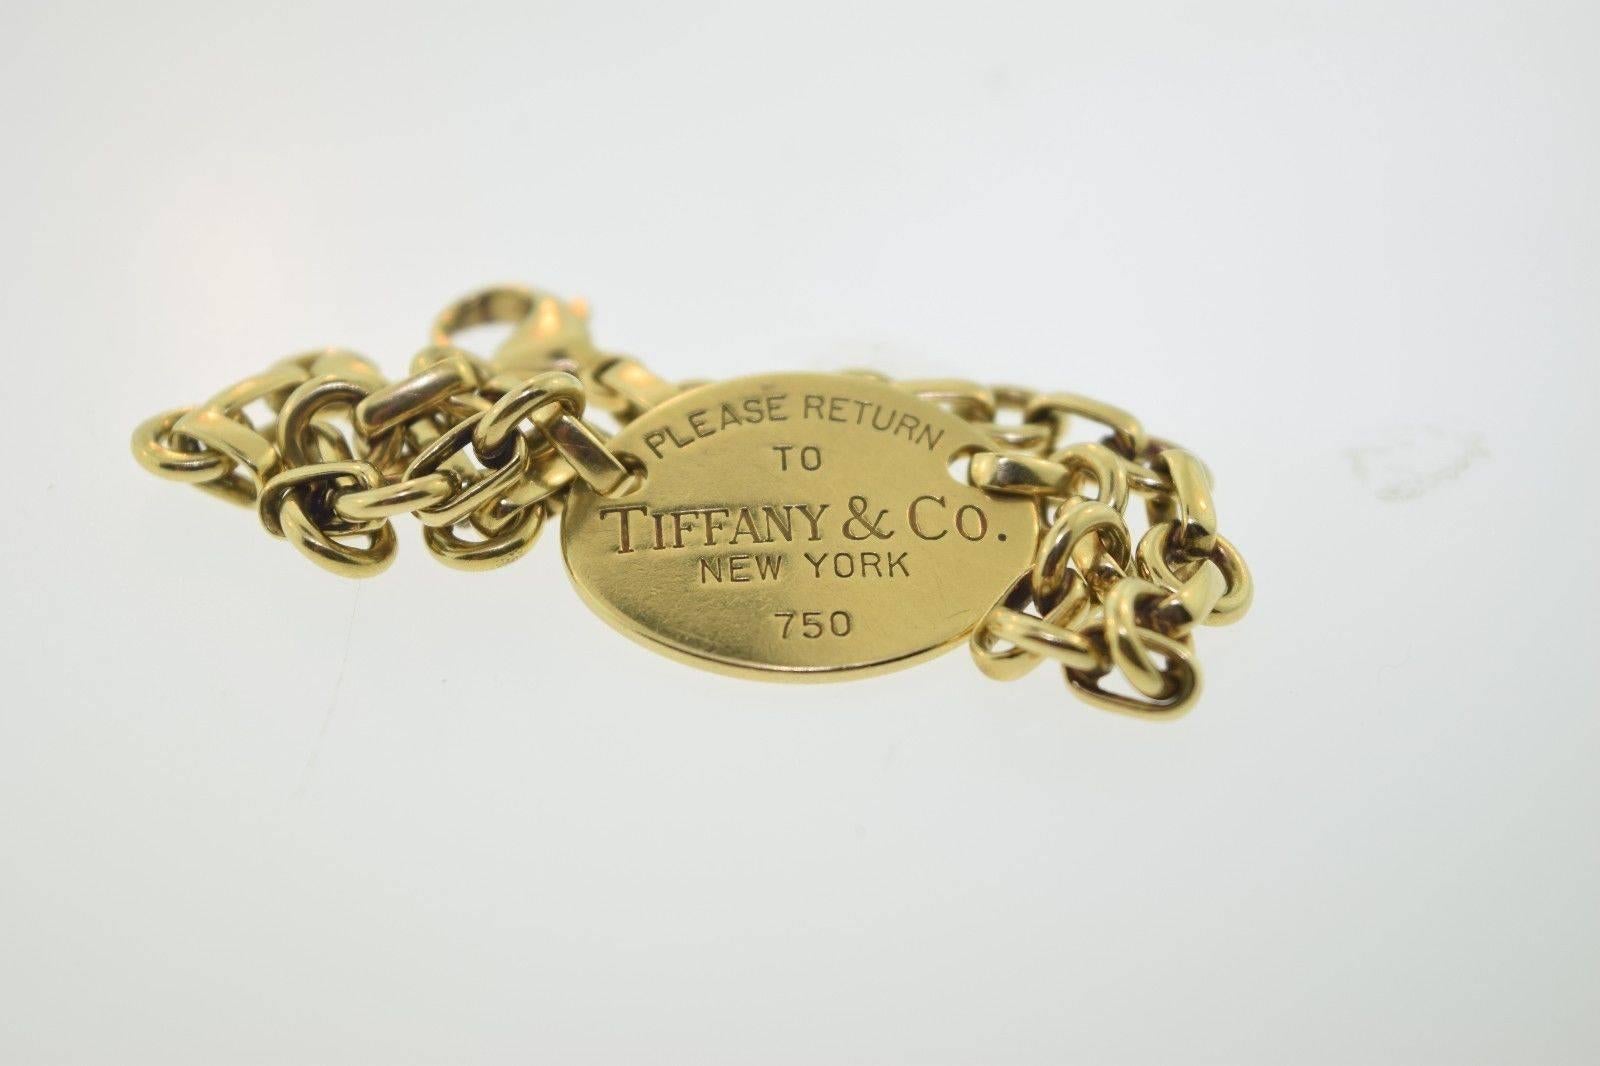 Tiffany & Co. 'Return to Tiffany' Bracelet

Metal: 18k Yellow Gold

Length: 7 3/8”, you can adjust the bracelet to fit your wrist by moving the lobster clasp to any link on the bracelet

Weight: approx. 20 g

Hallmarked: “Please return to